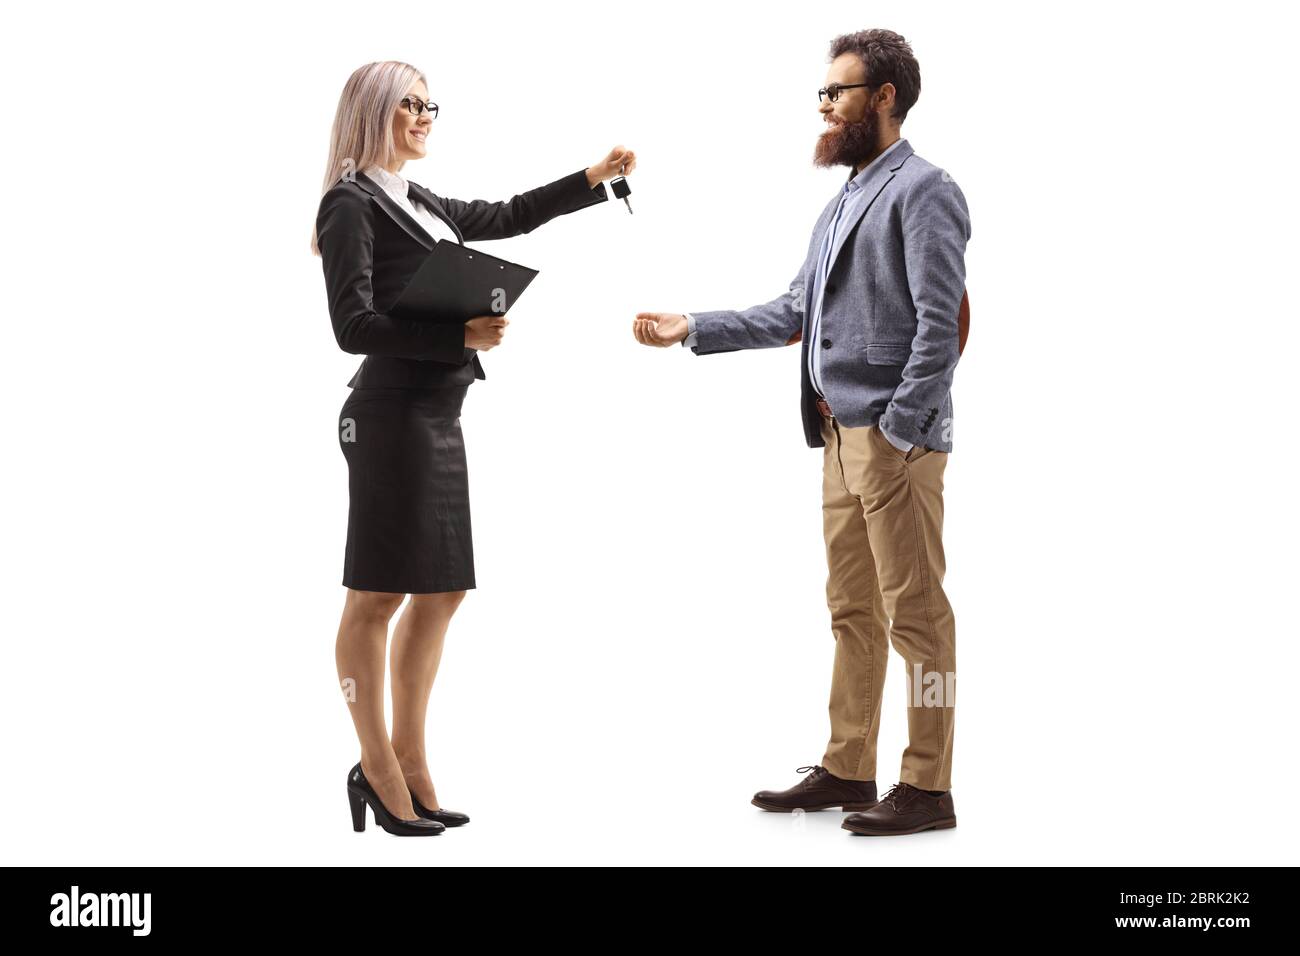 Full length profile shot of a businesswoman giving car keys to a bearded man isolated on white background Stock Photo